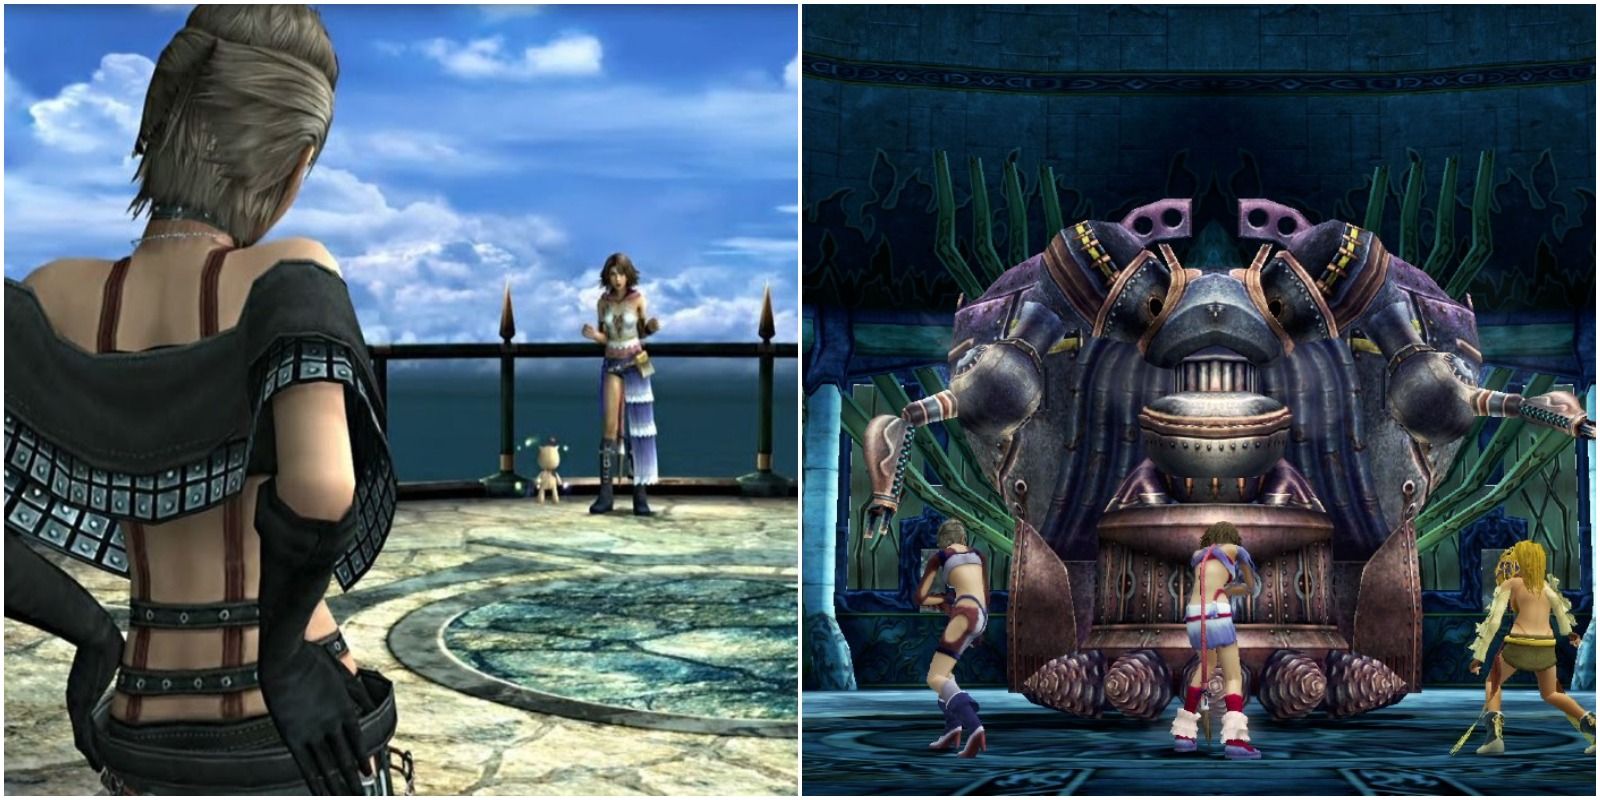 Images from side quests in Final Fantasy 10-2